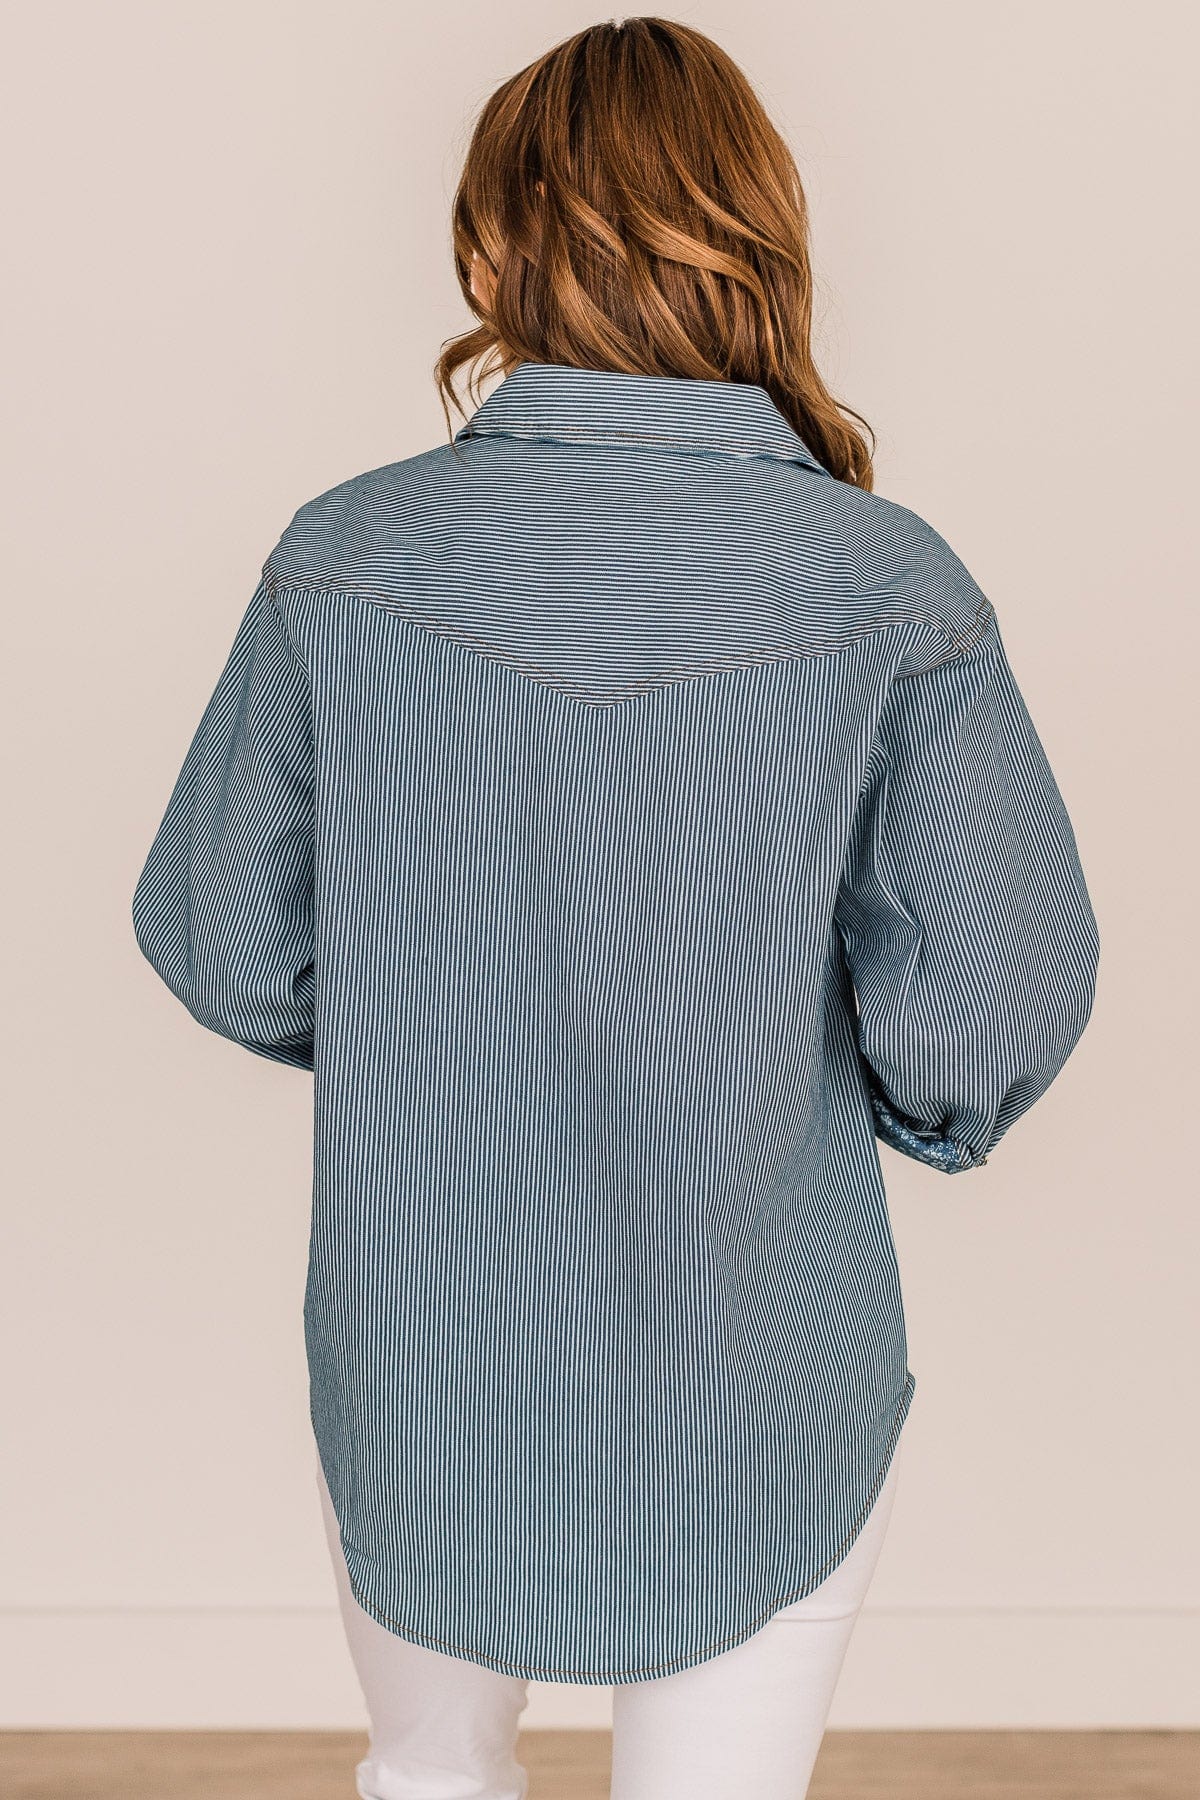 Promise Me This Button Down Top- Denim